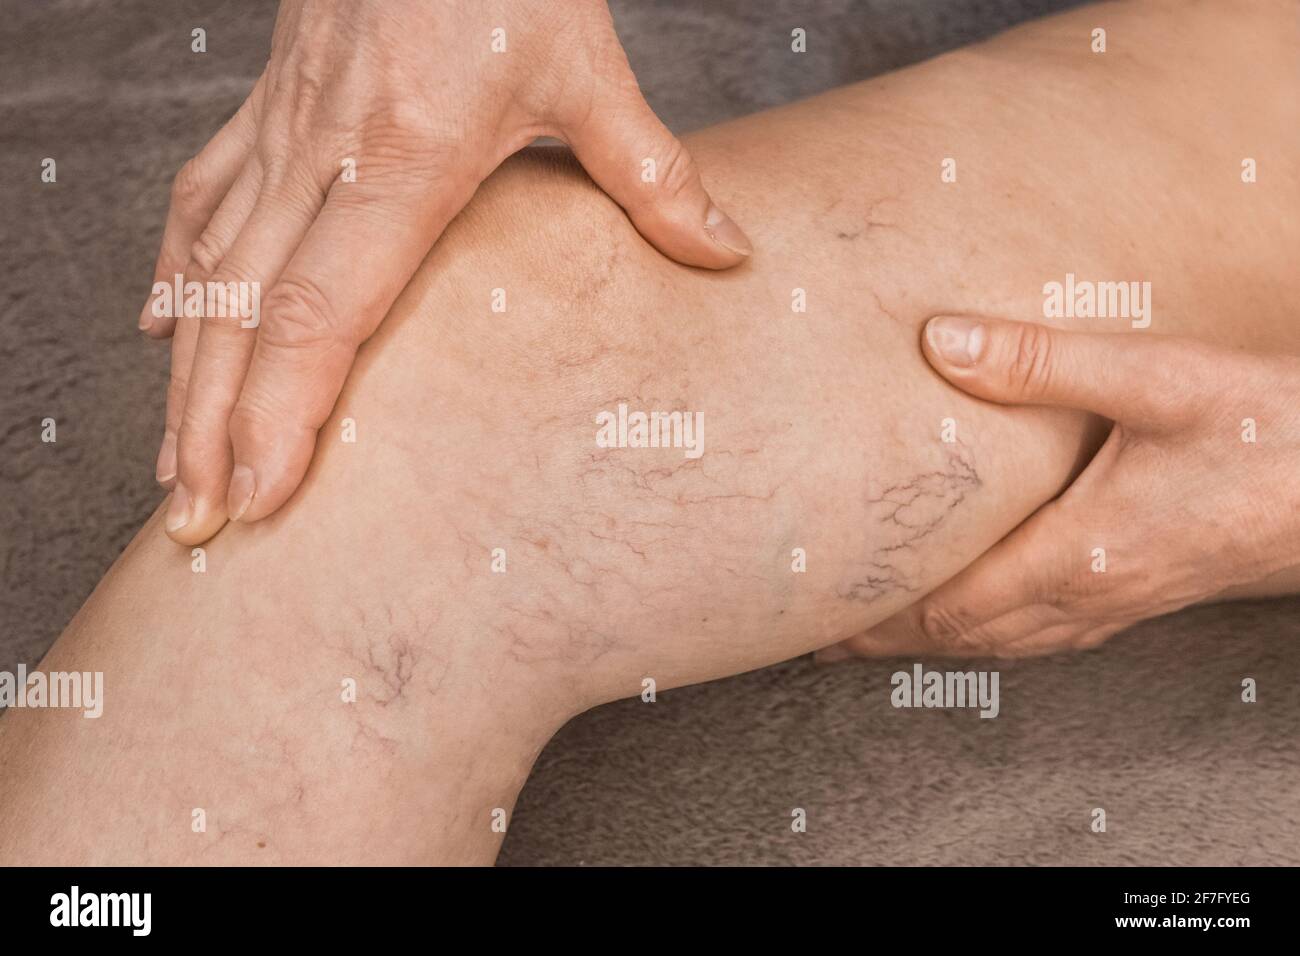 The hands of an elderly woman shows on varicose veins, sick female legs. Stock Photo